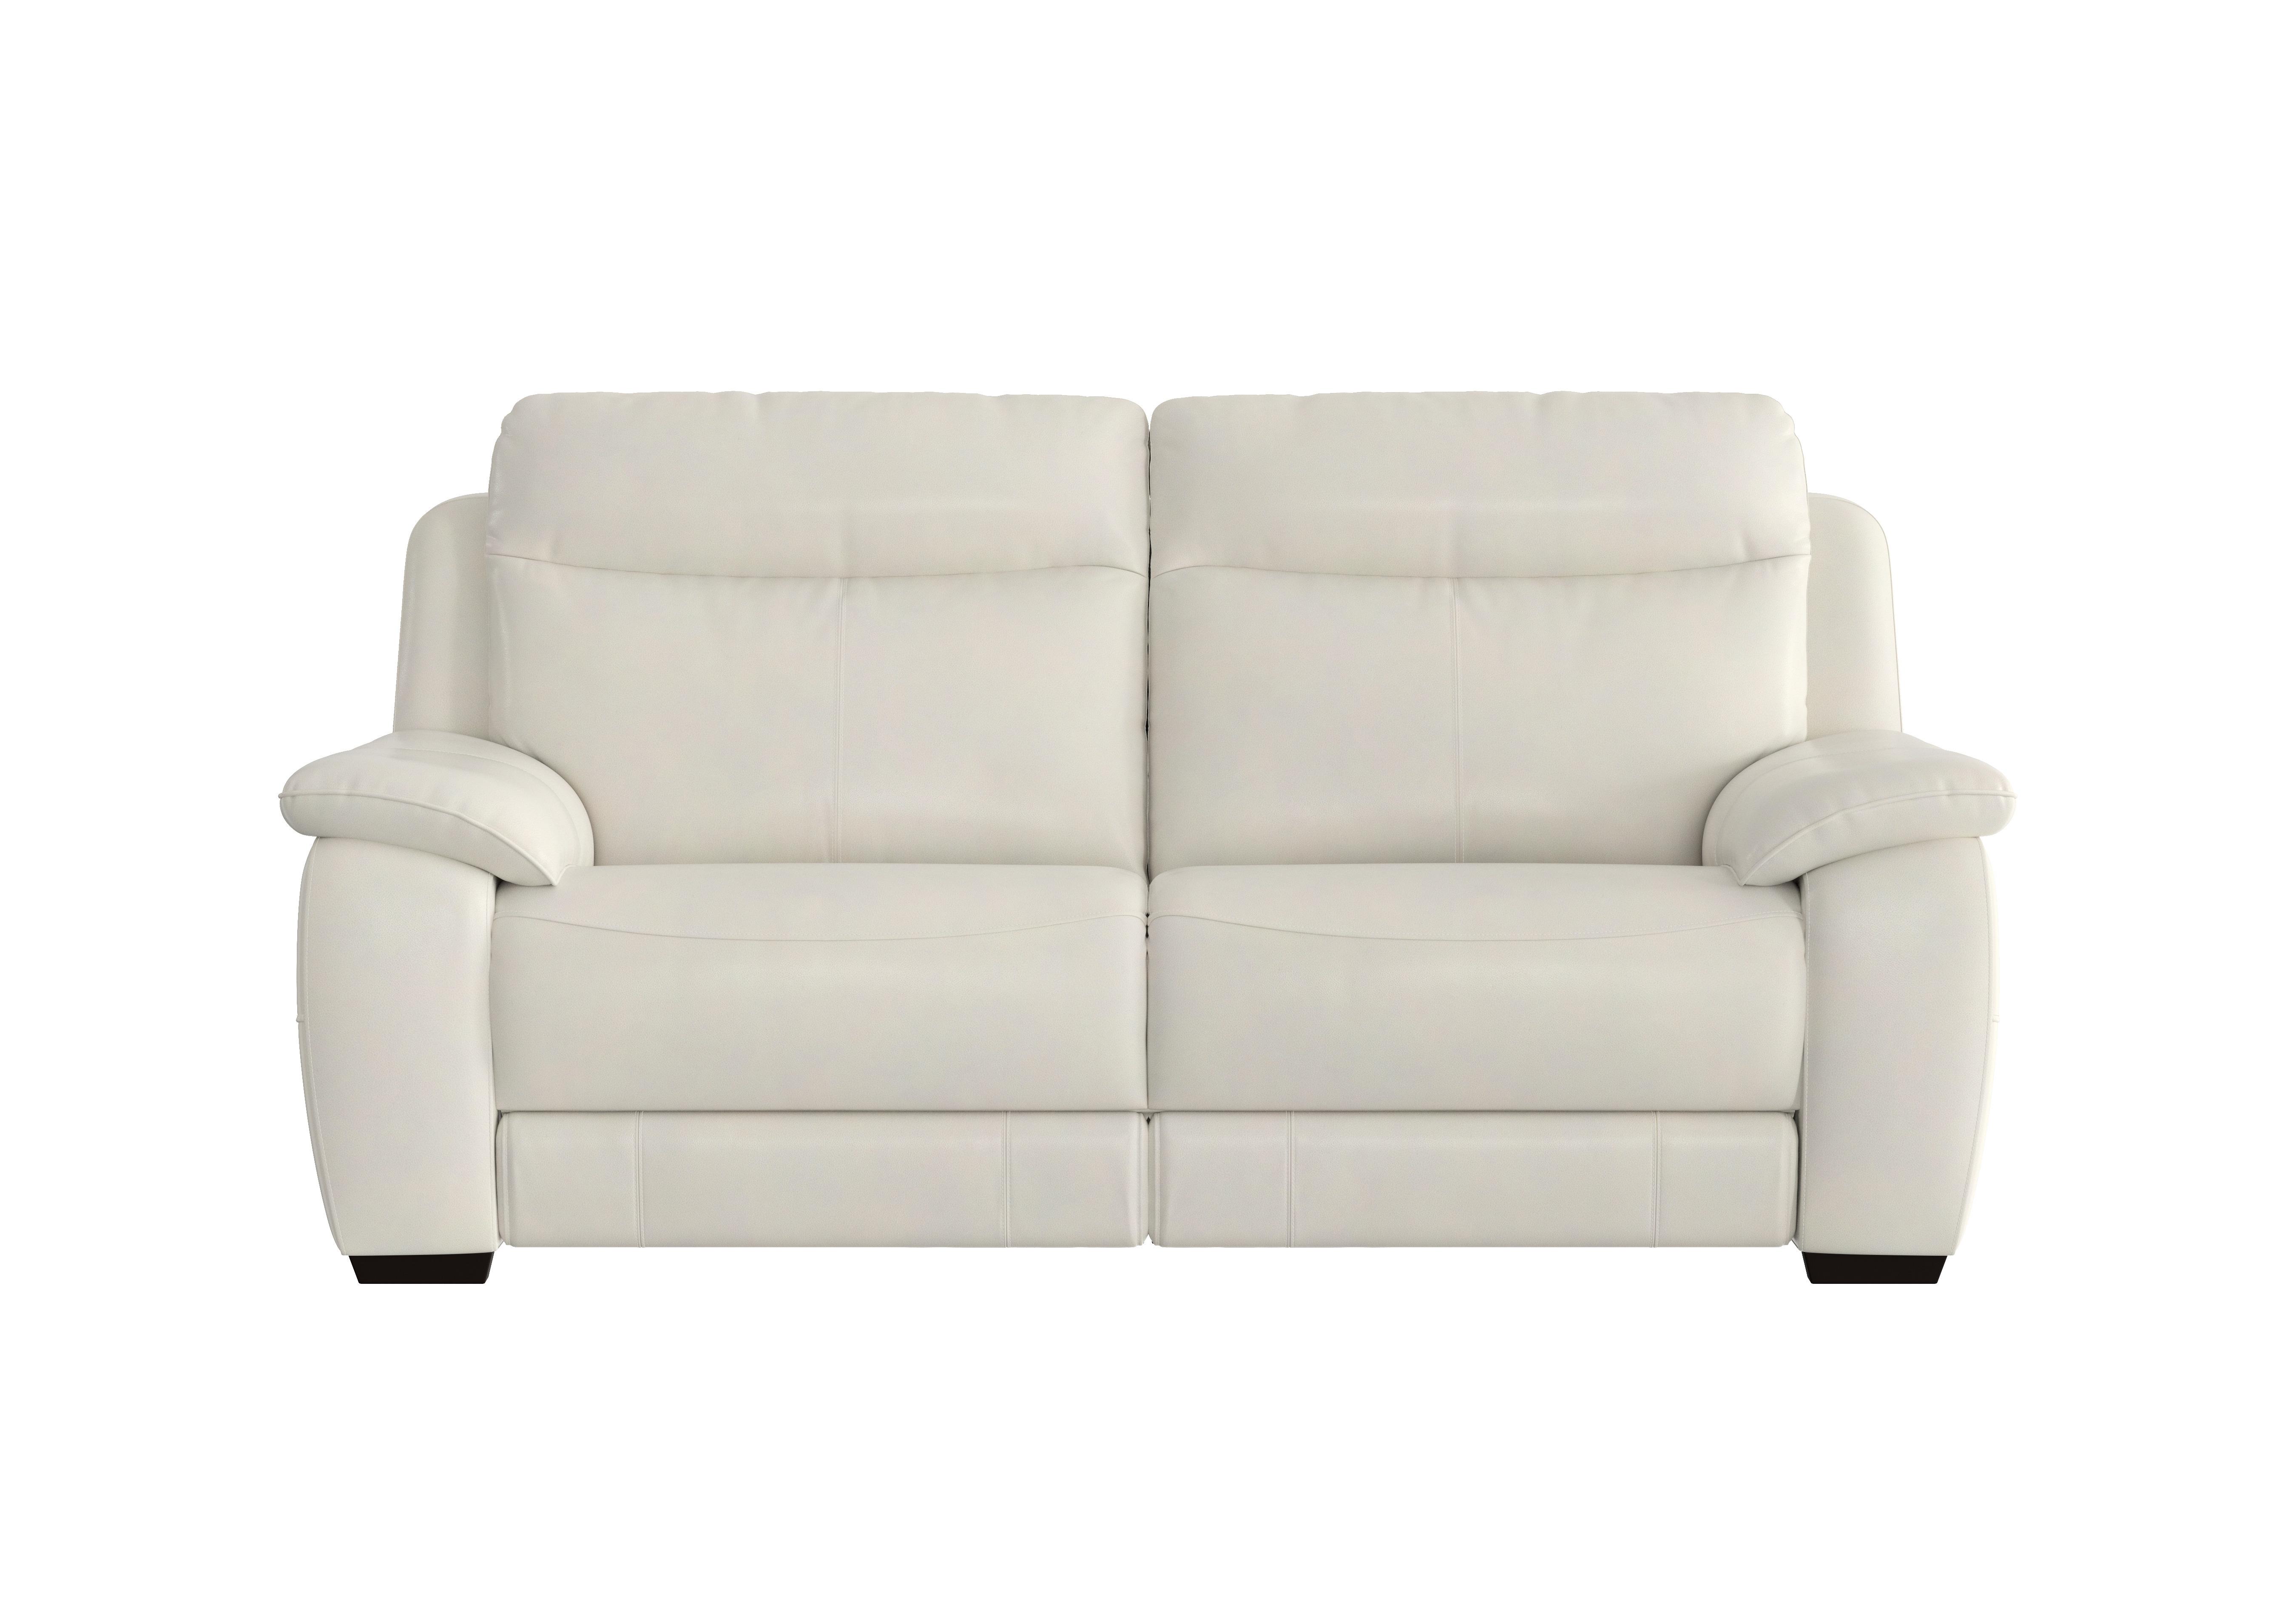 Starlight Express 3 Seater Leather Sofa in Bv-156e Frost on Furniture Village